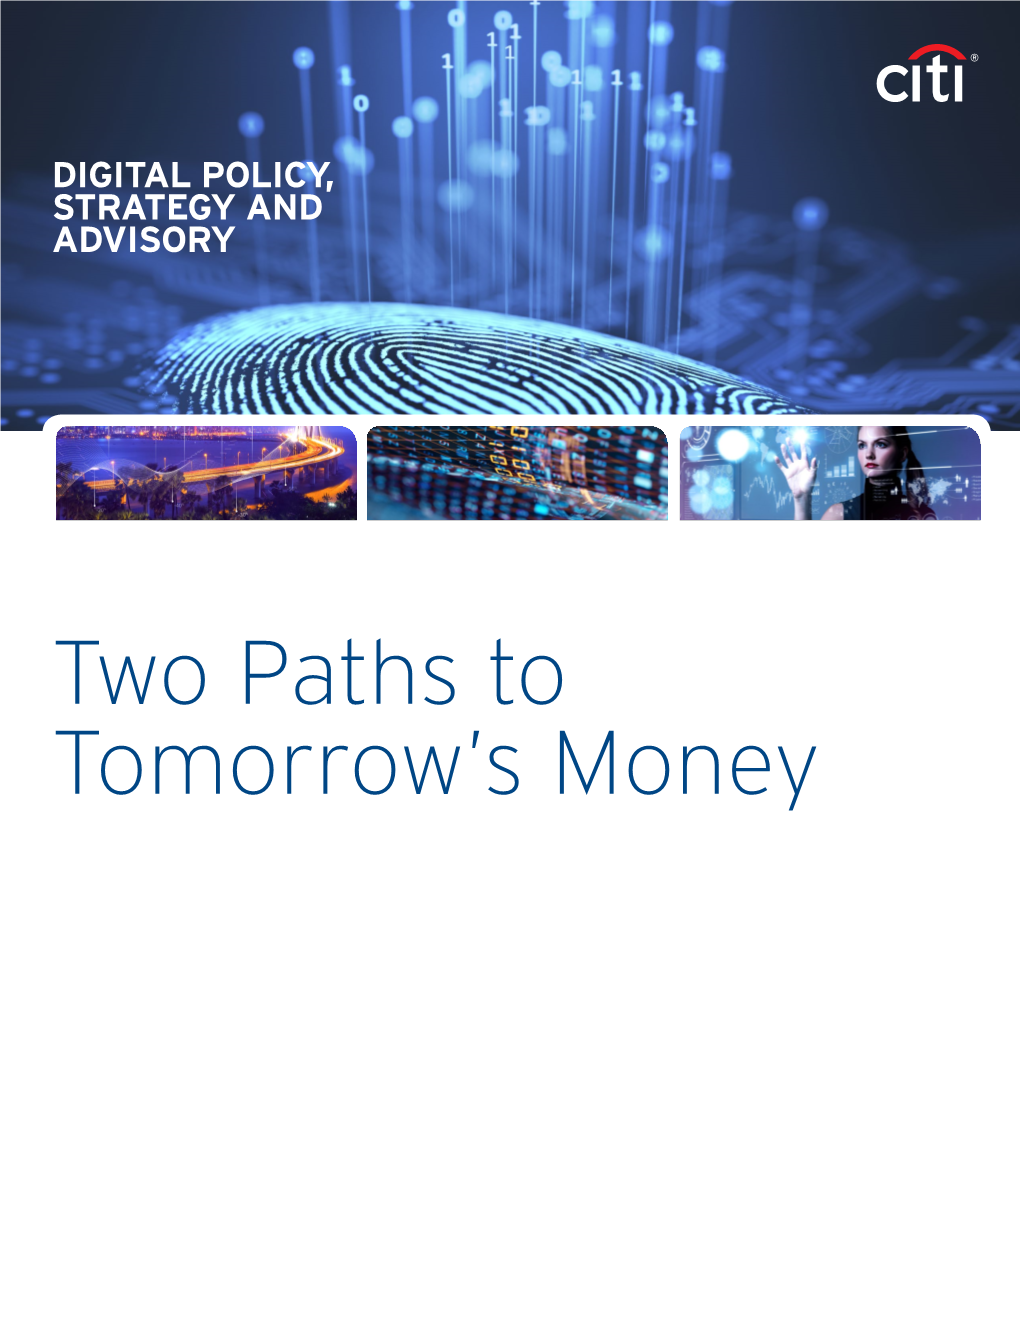 Two Paths to Tomorrow's Money, Citi Bank